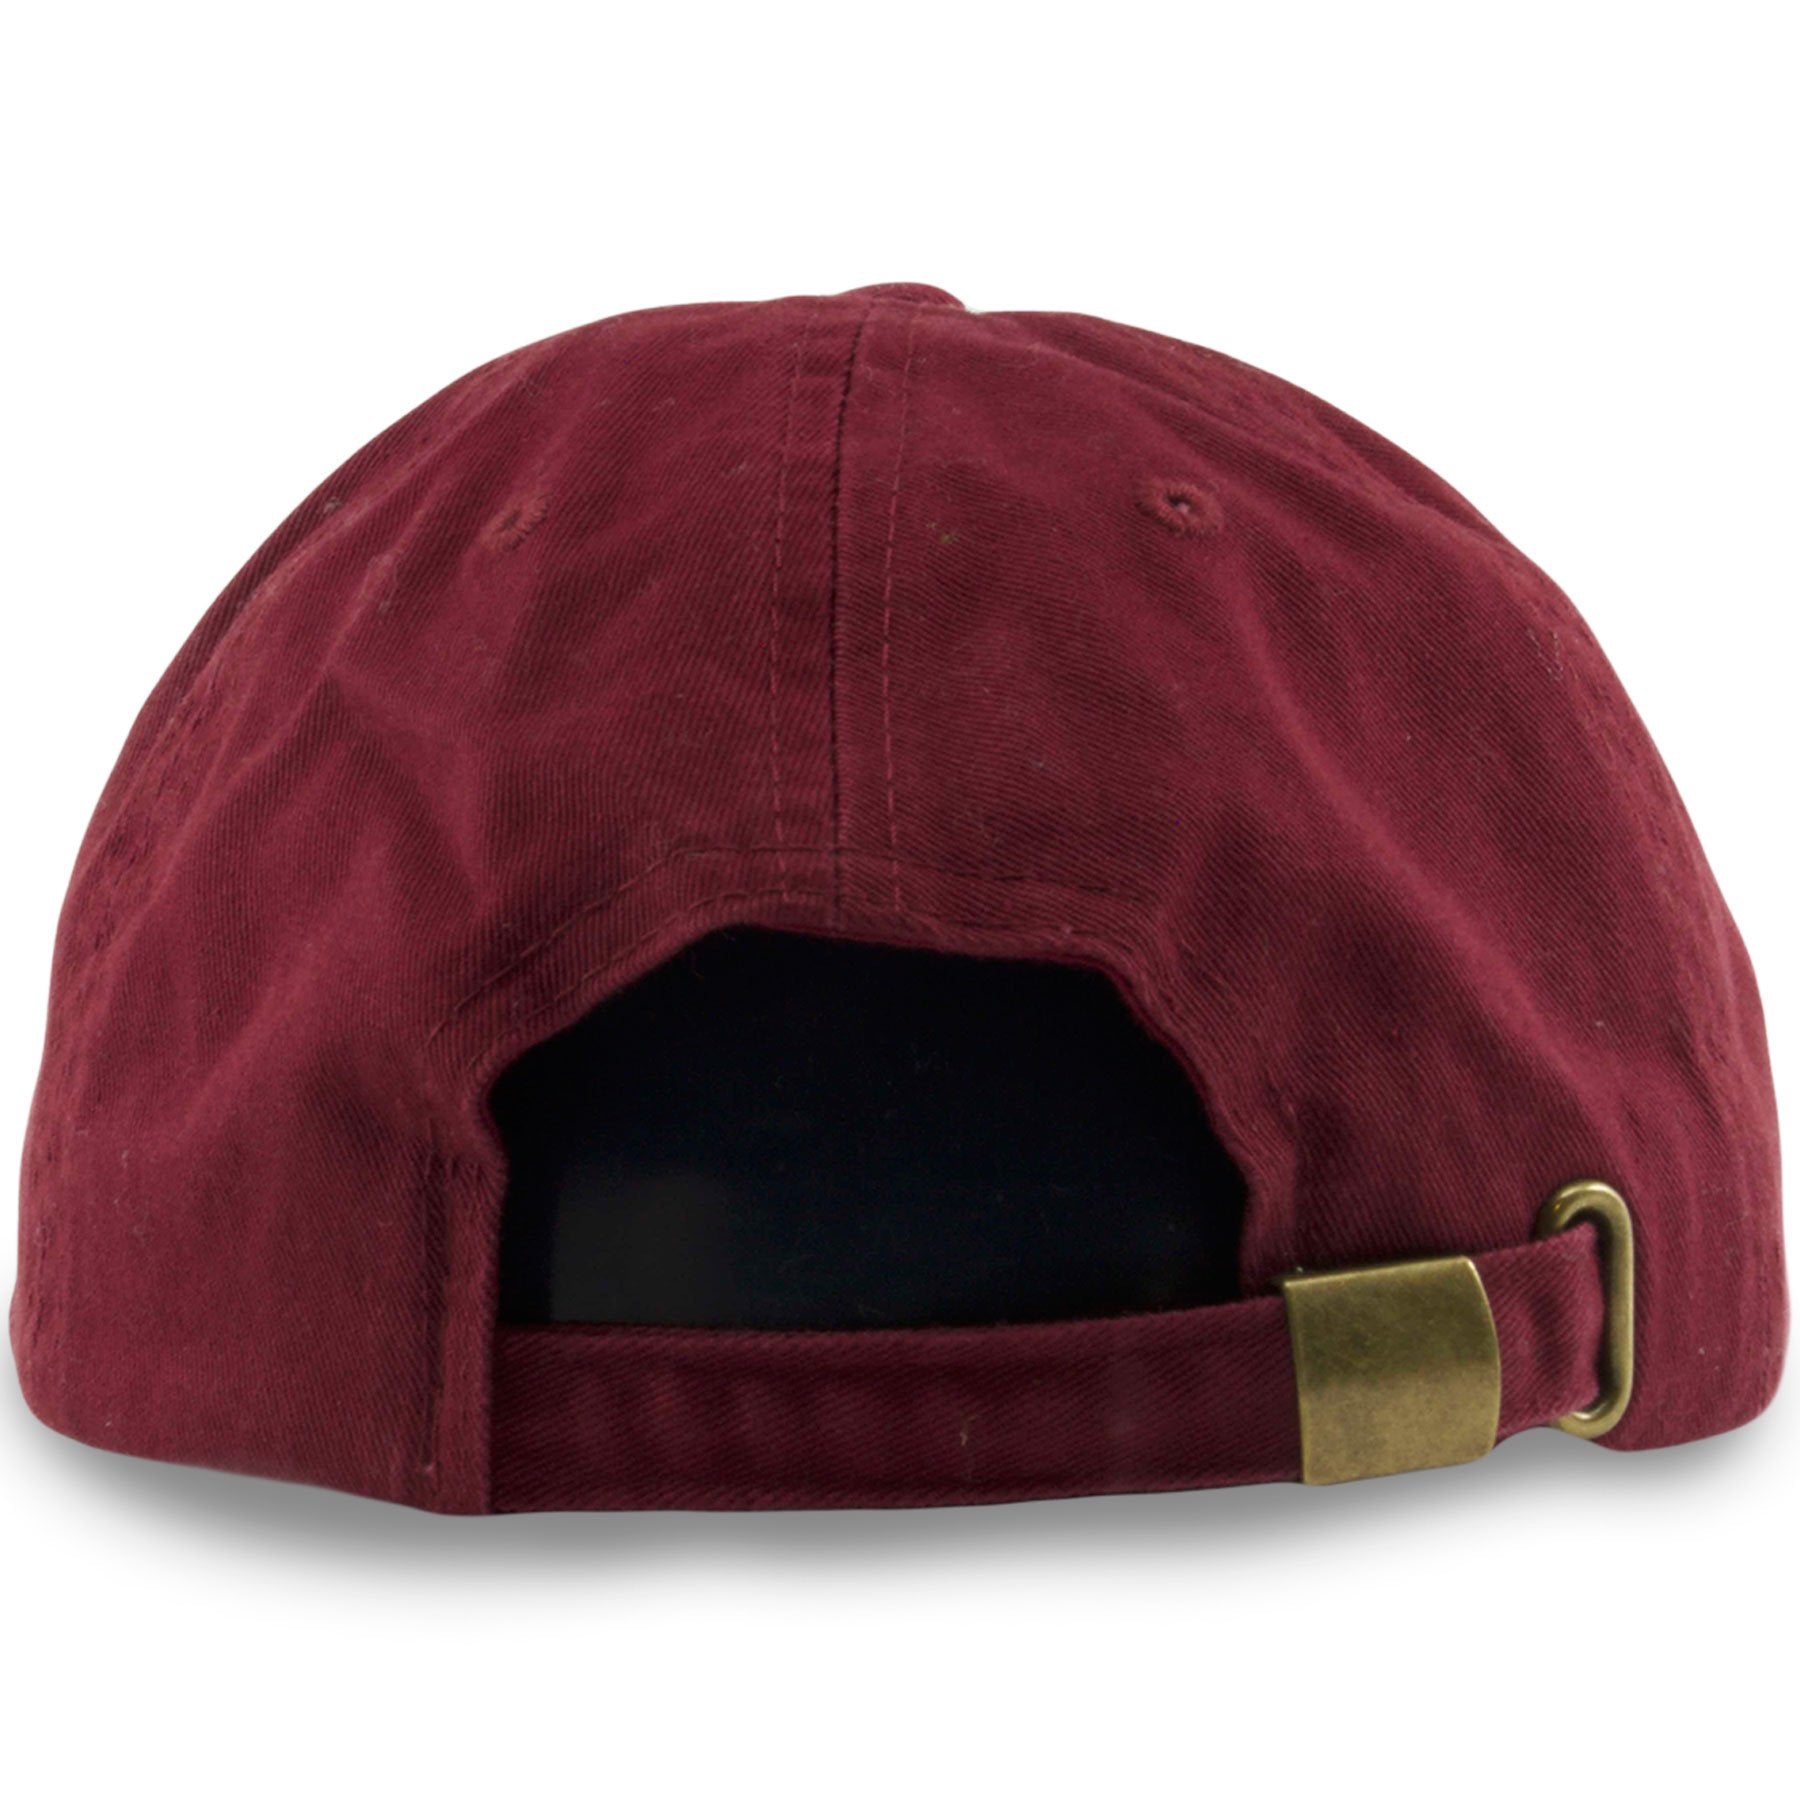 the back of the maroon adjustable boy bye dad hat is a maroon adjustable strap that is secured by a metallic closure